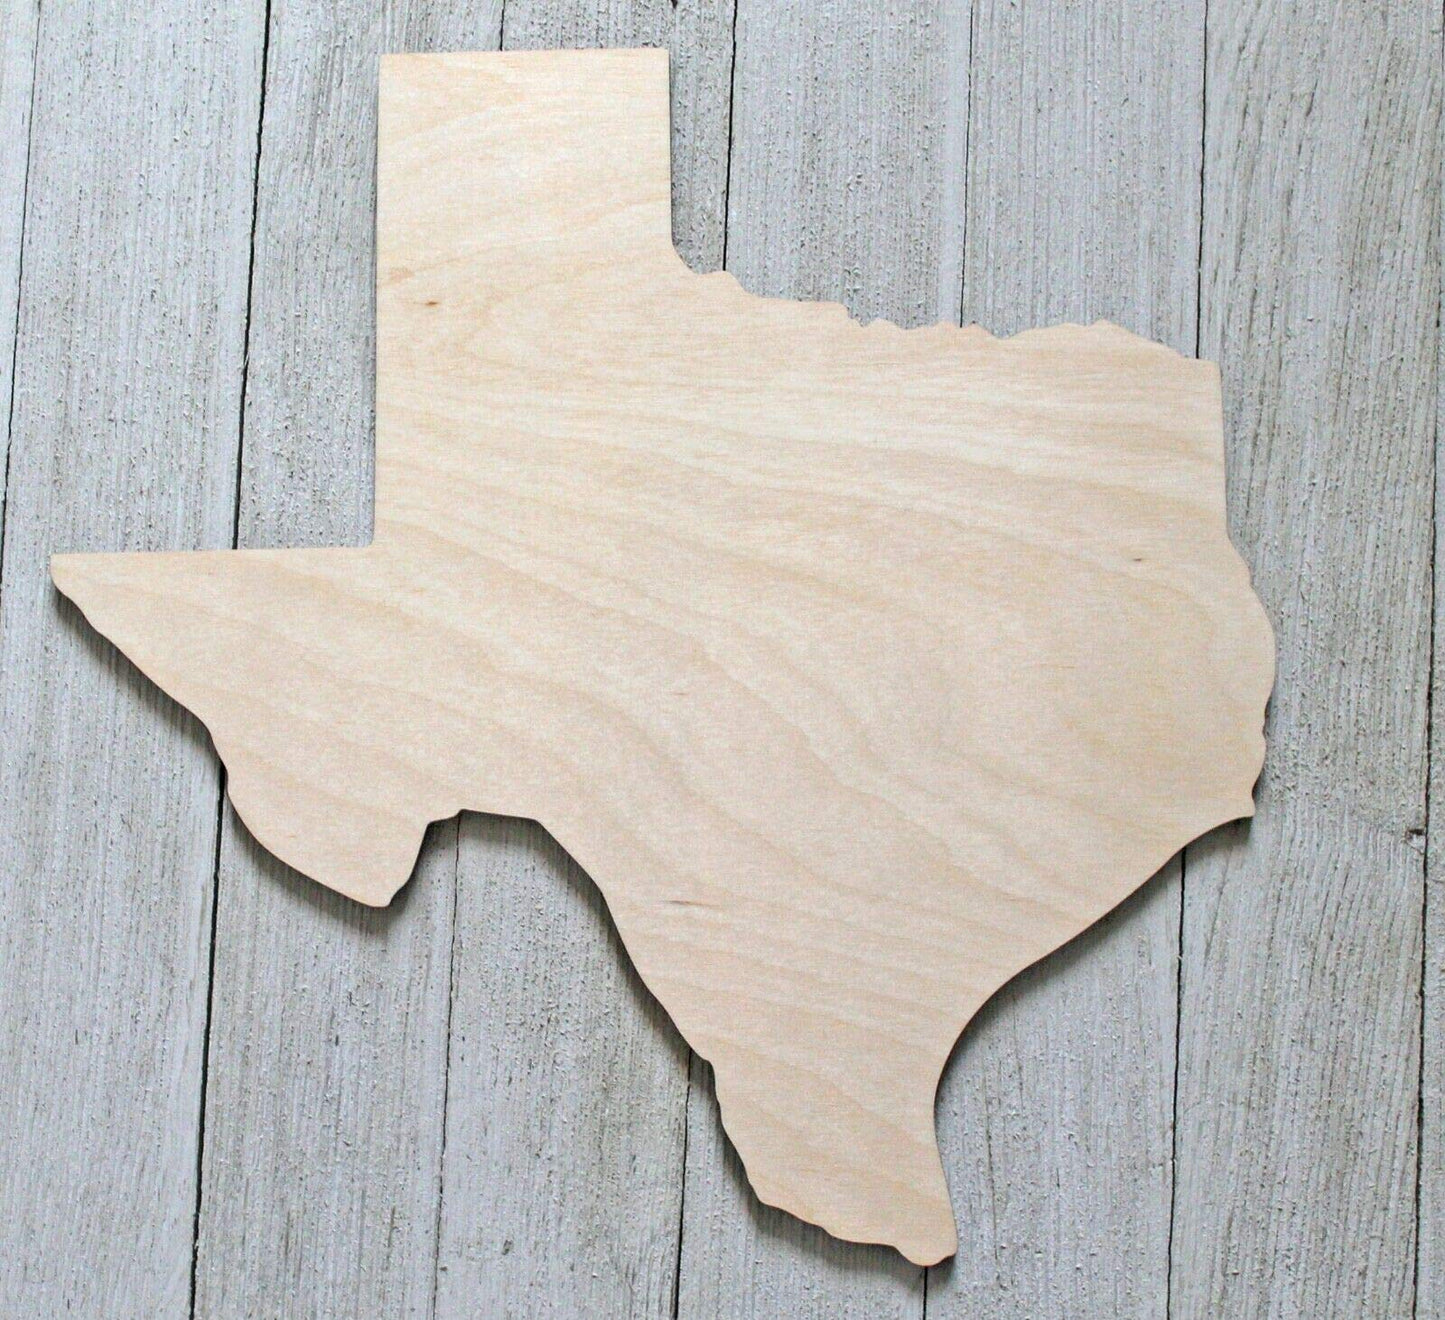 18" State of Texas Unfinished Wood Cutout Cut Out Shapes Ready to Paint Stain Crafts